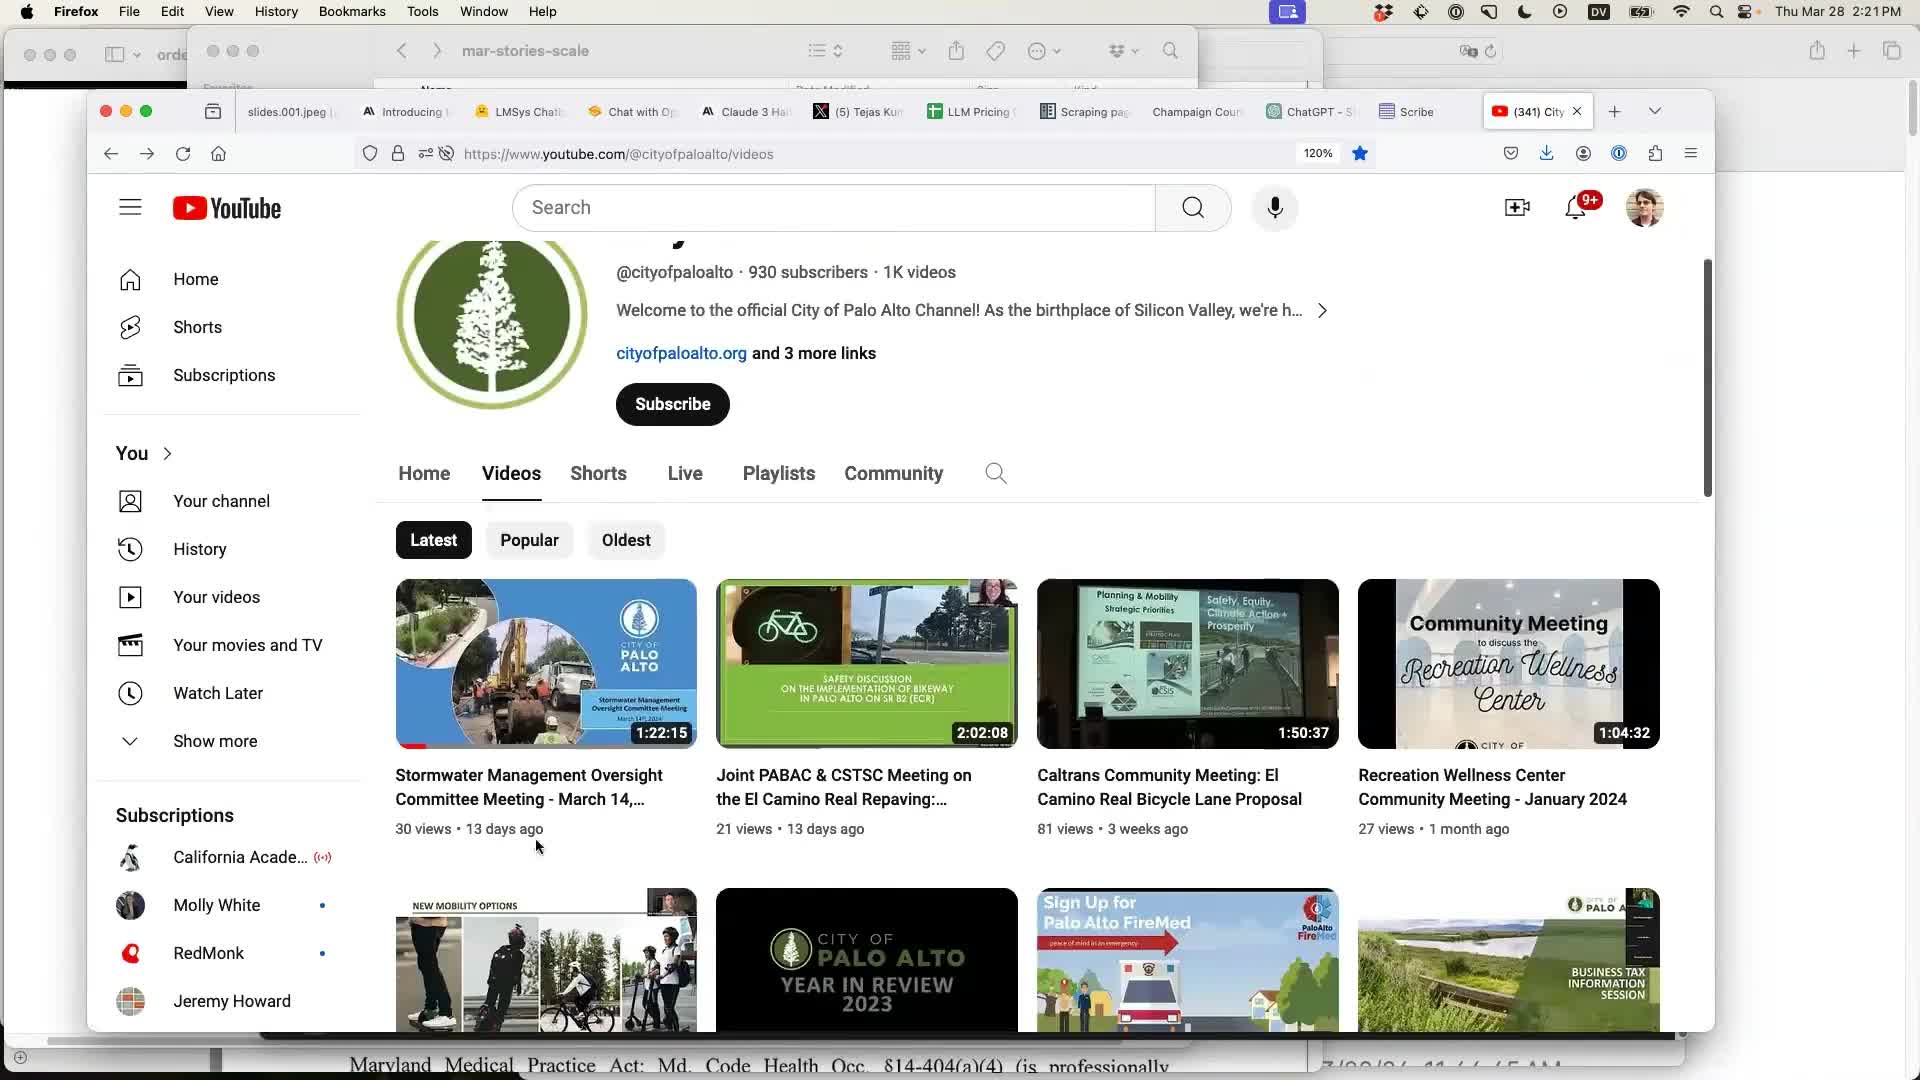 YouTube City of Palo Alto - the top video is Stormwater Management Oversight Committee Meeting - March 14, 30 views • 13 days ago